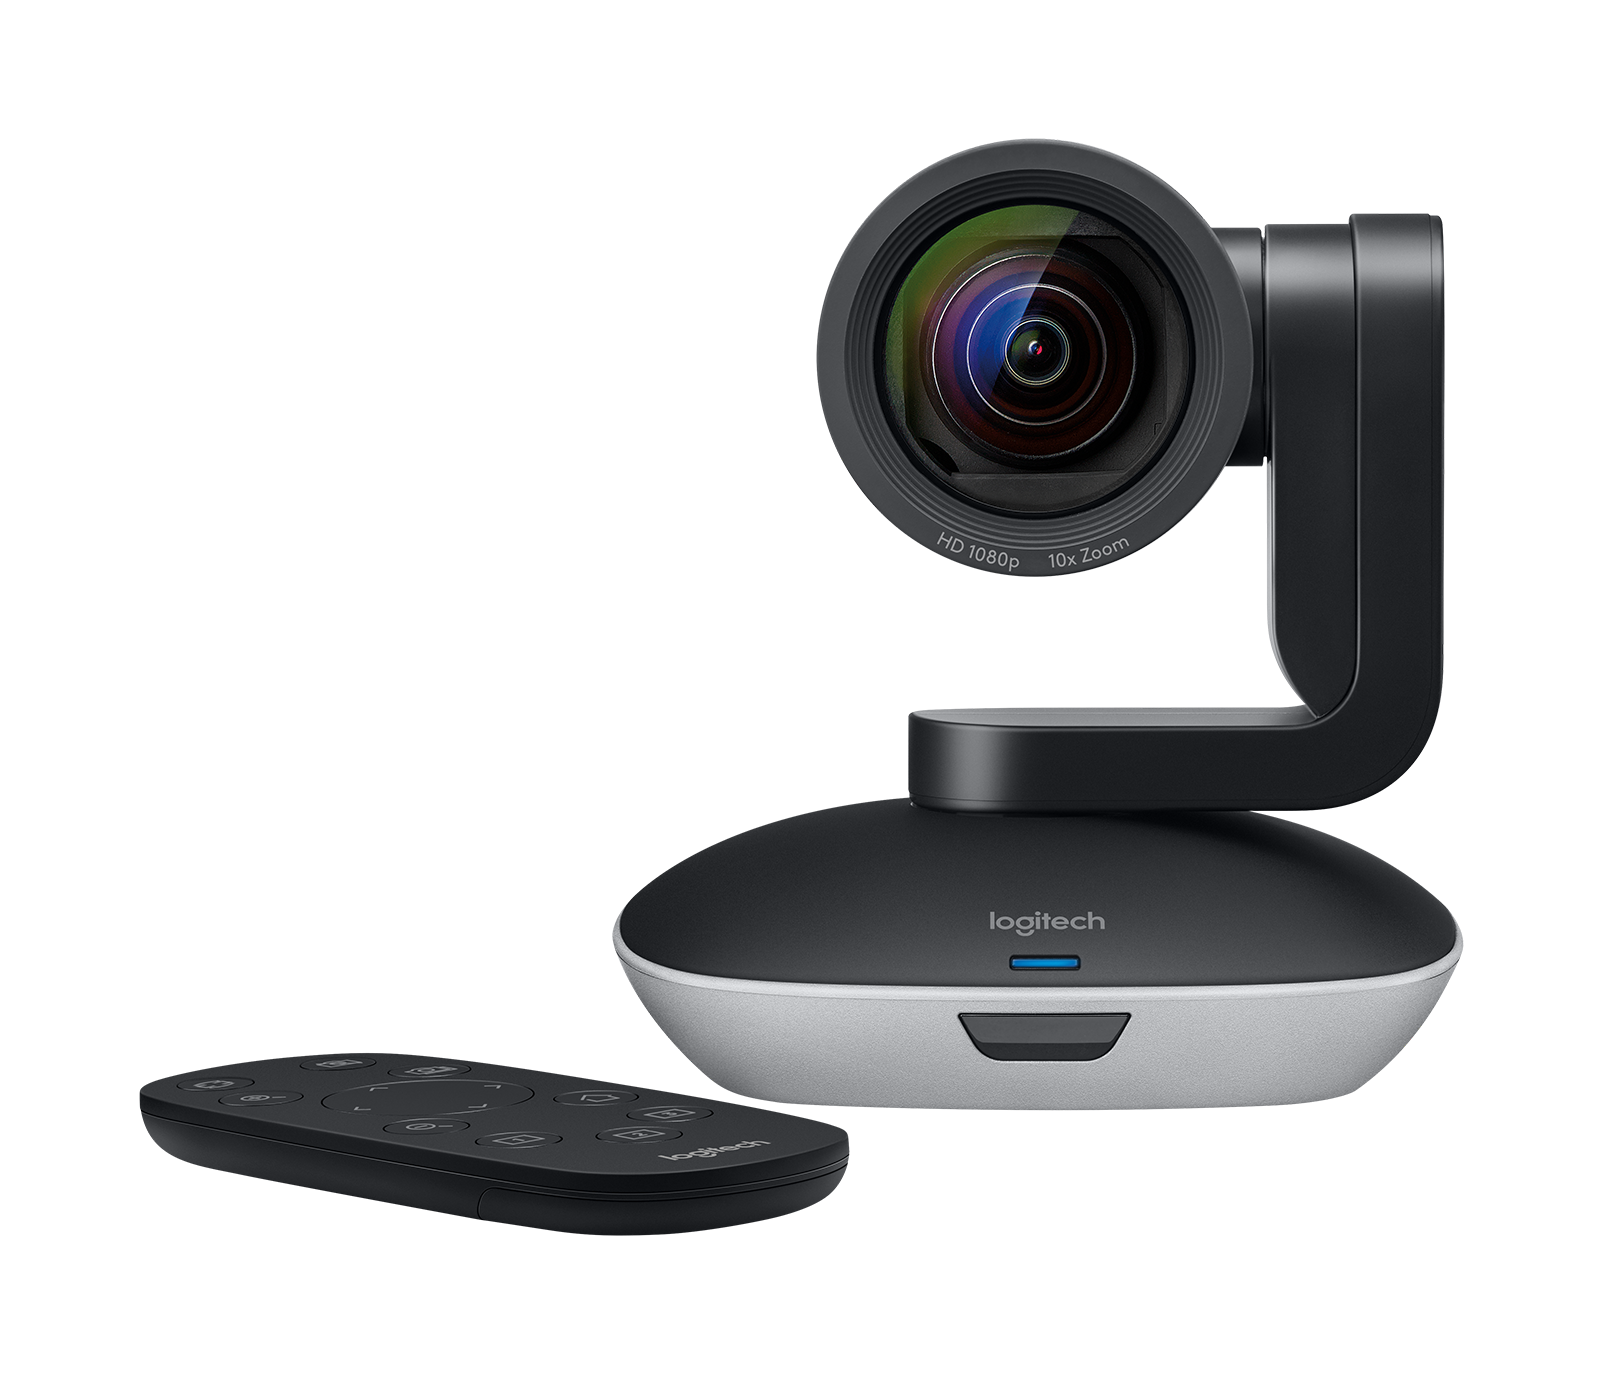 Carl Zeiss Logitech 860-000504 Carl Zeiss 1080P HD Video Conference Camera missing Cables 